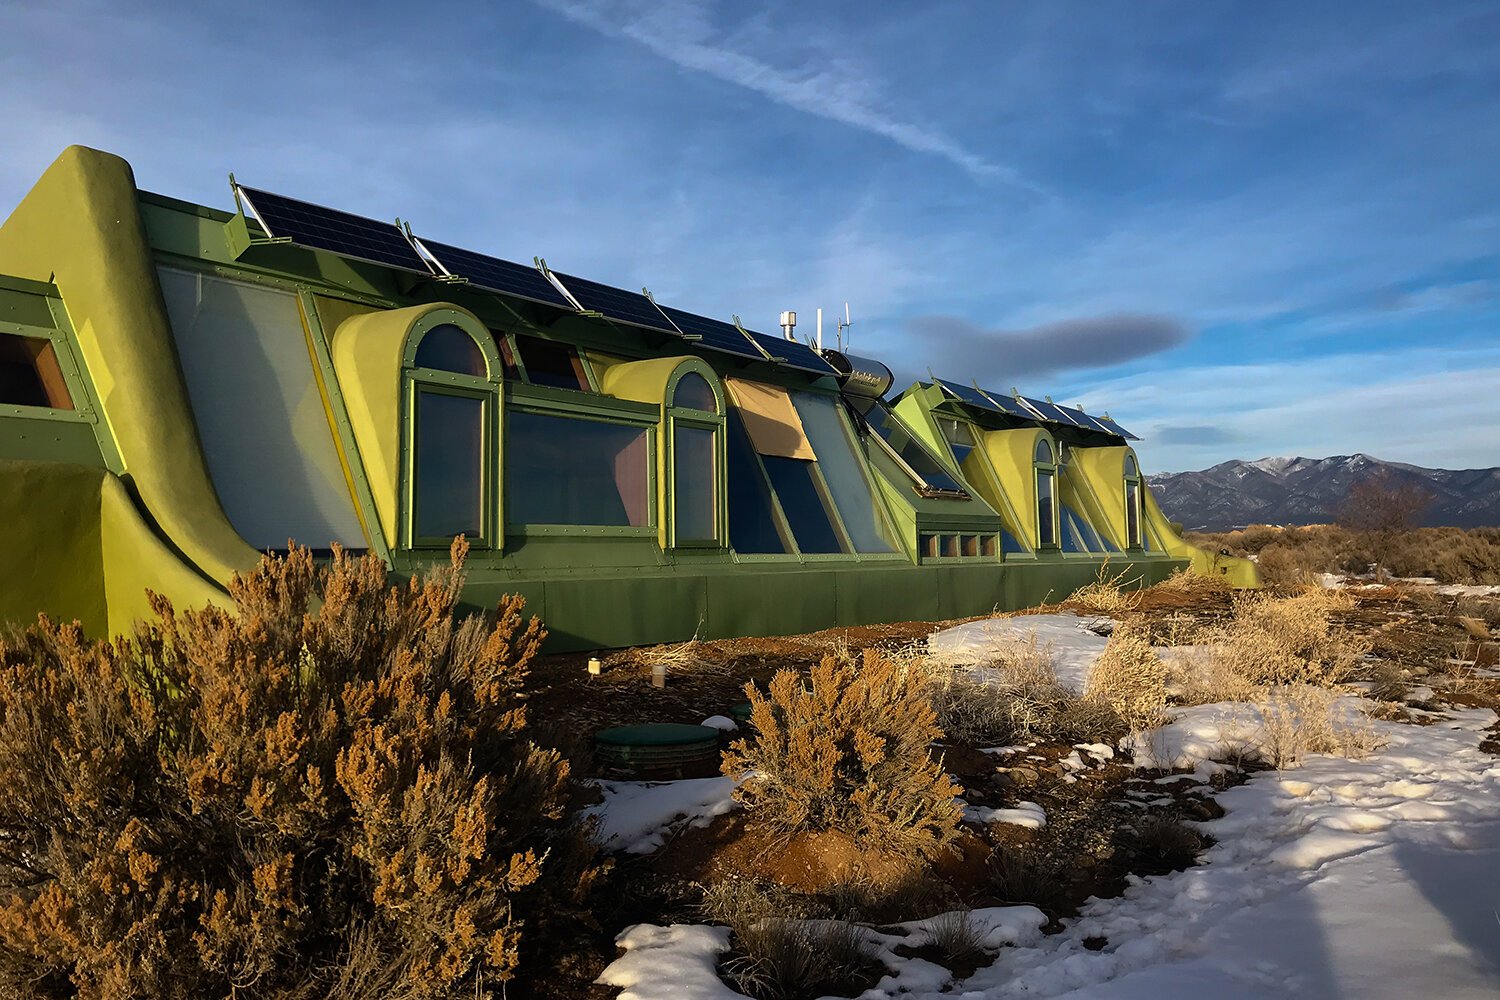 Travels and Curiosities - Where are Earthships in Taos